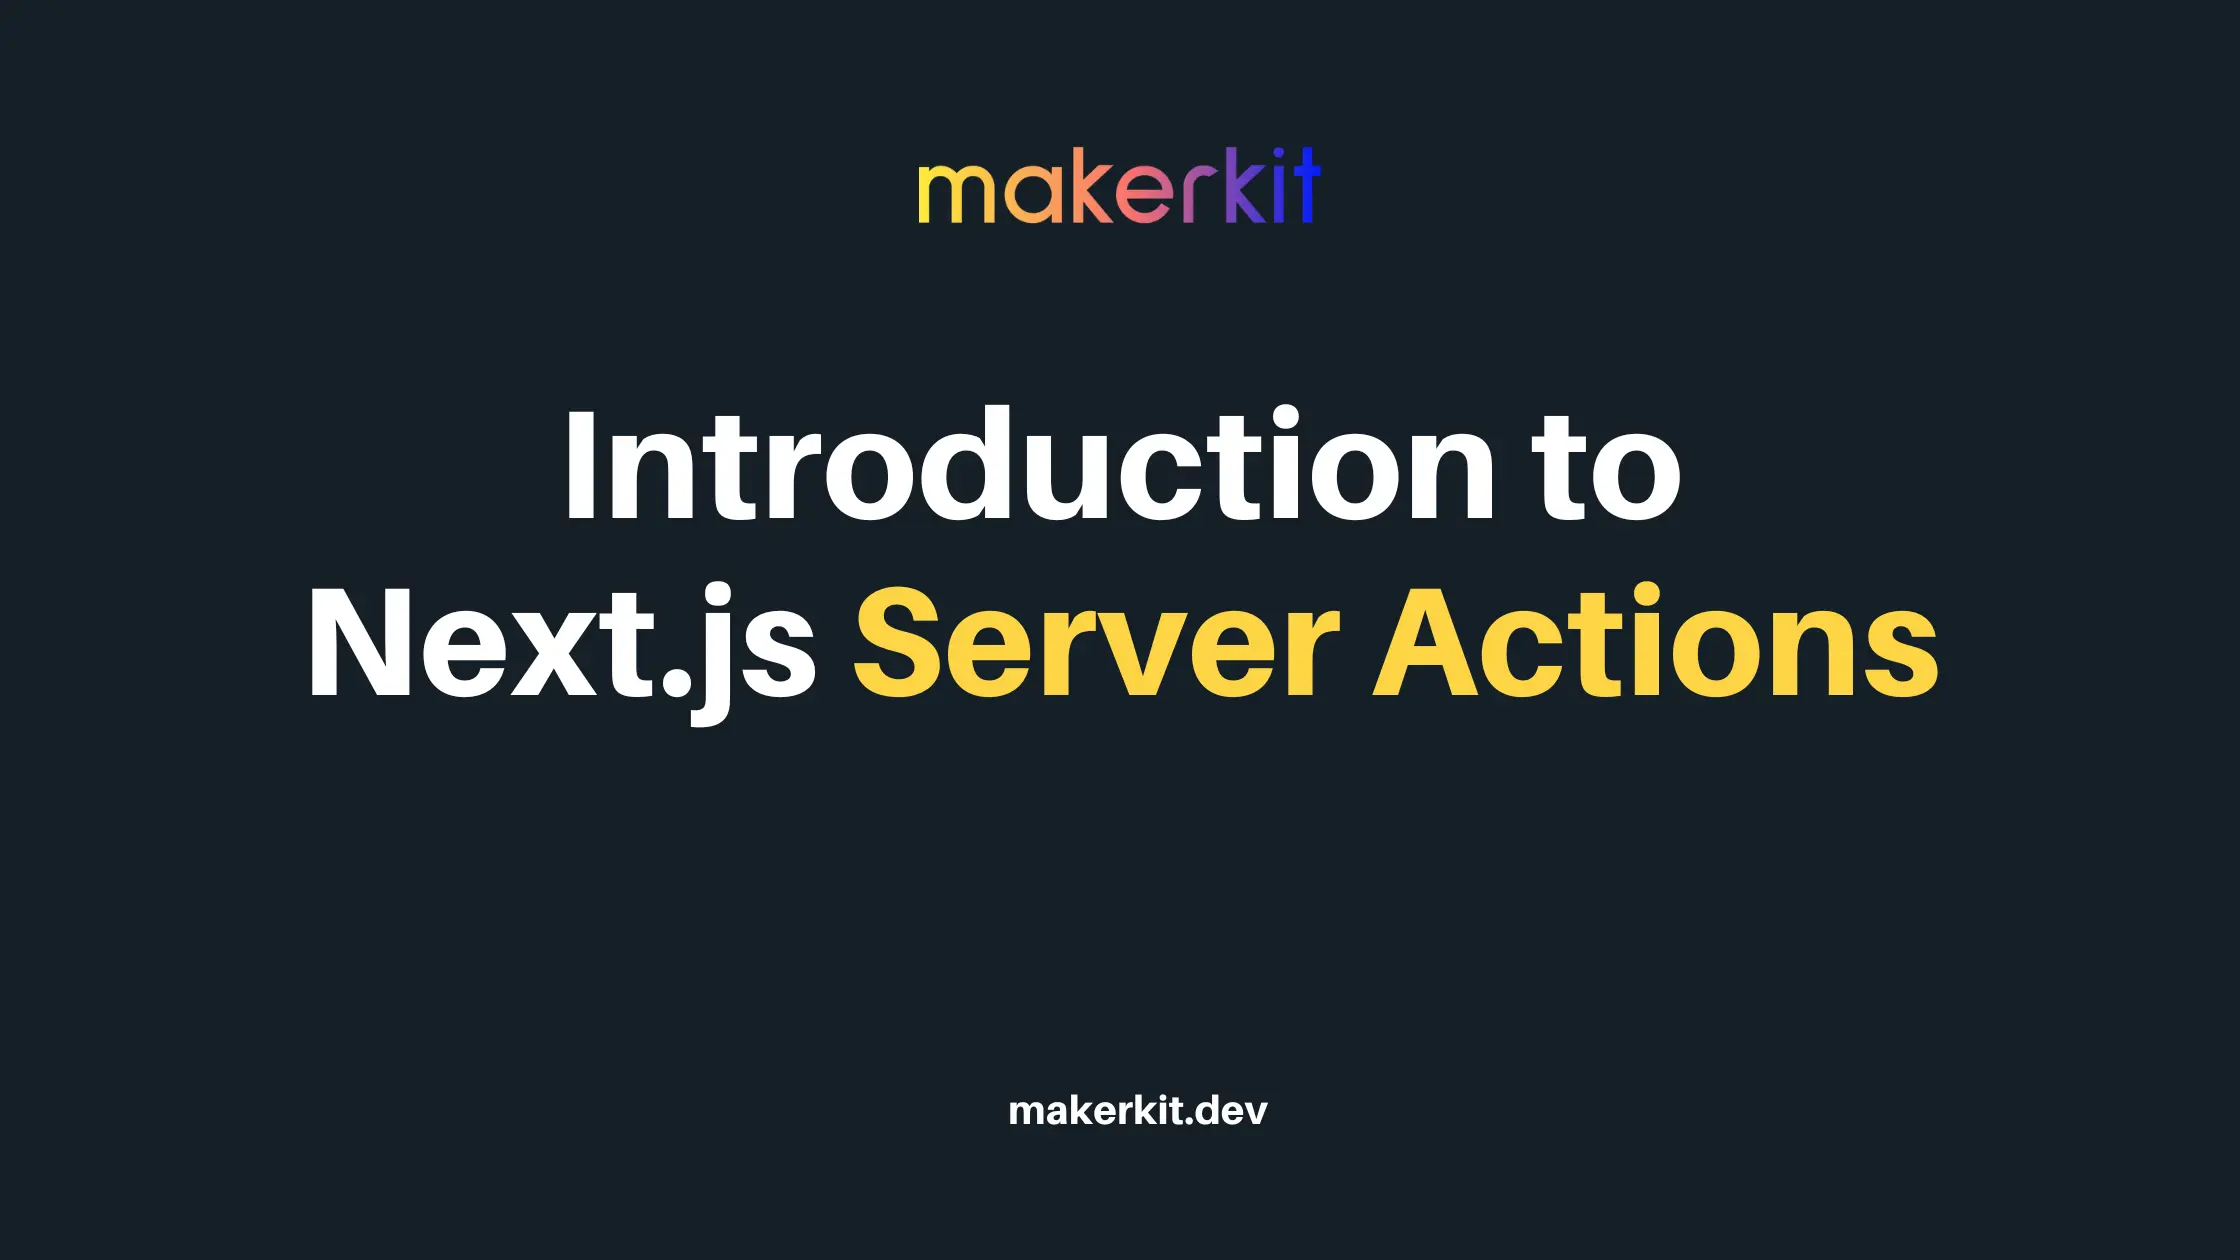 Cover Image for Introduction to Next.js Server Actions